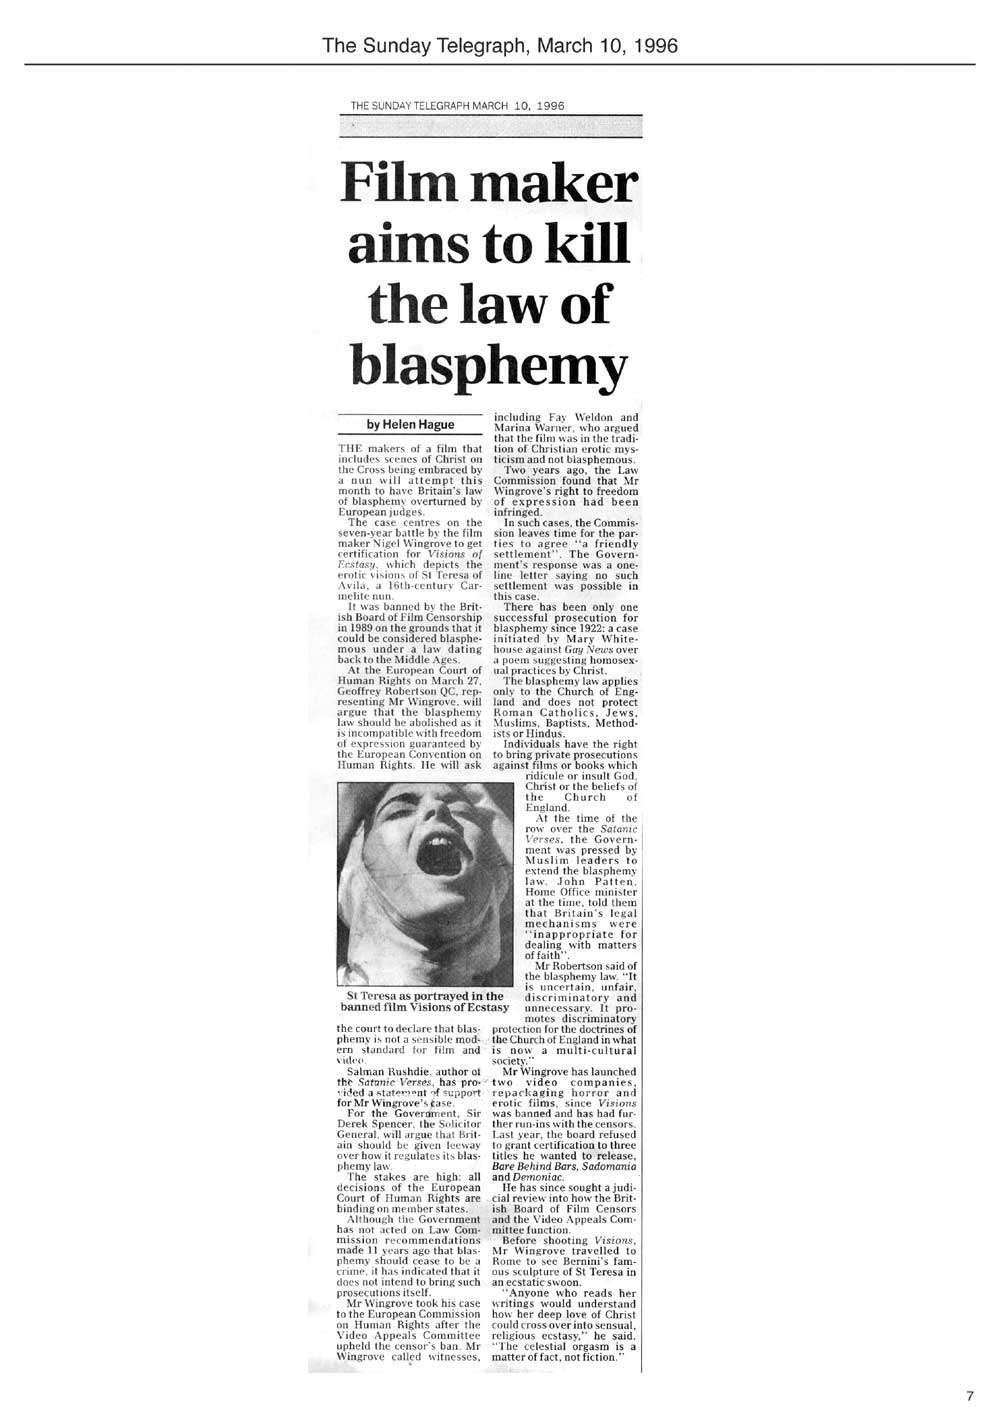 The Sunday Telegraph, March 10, 1996